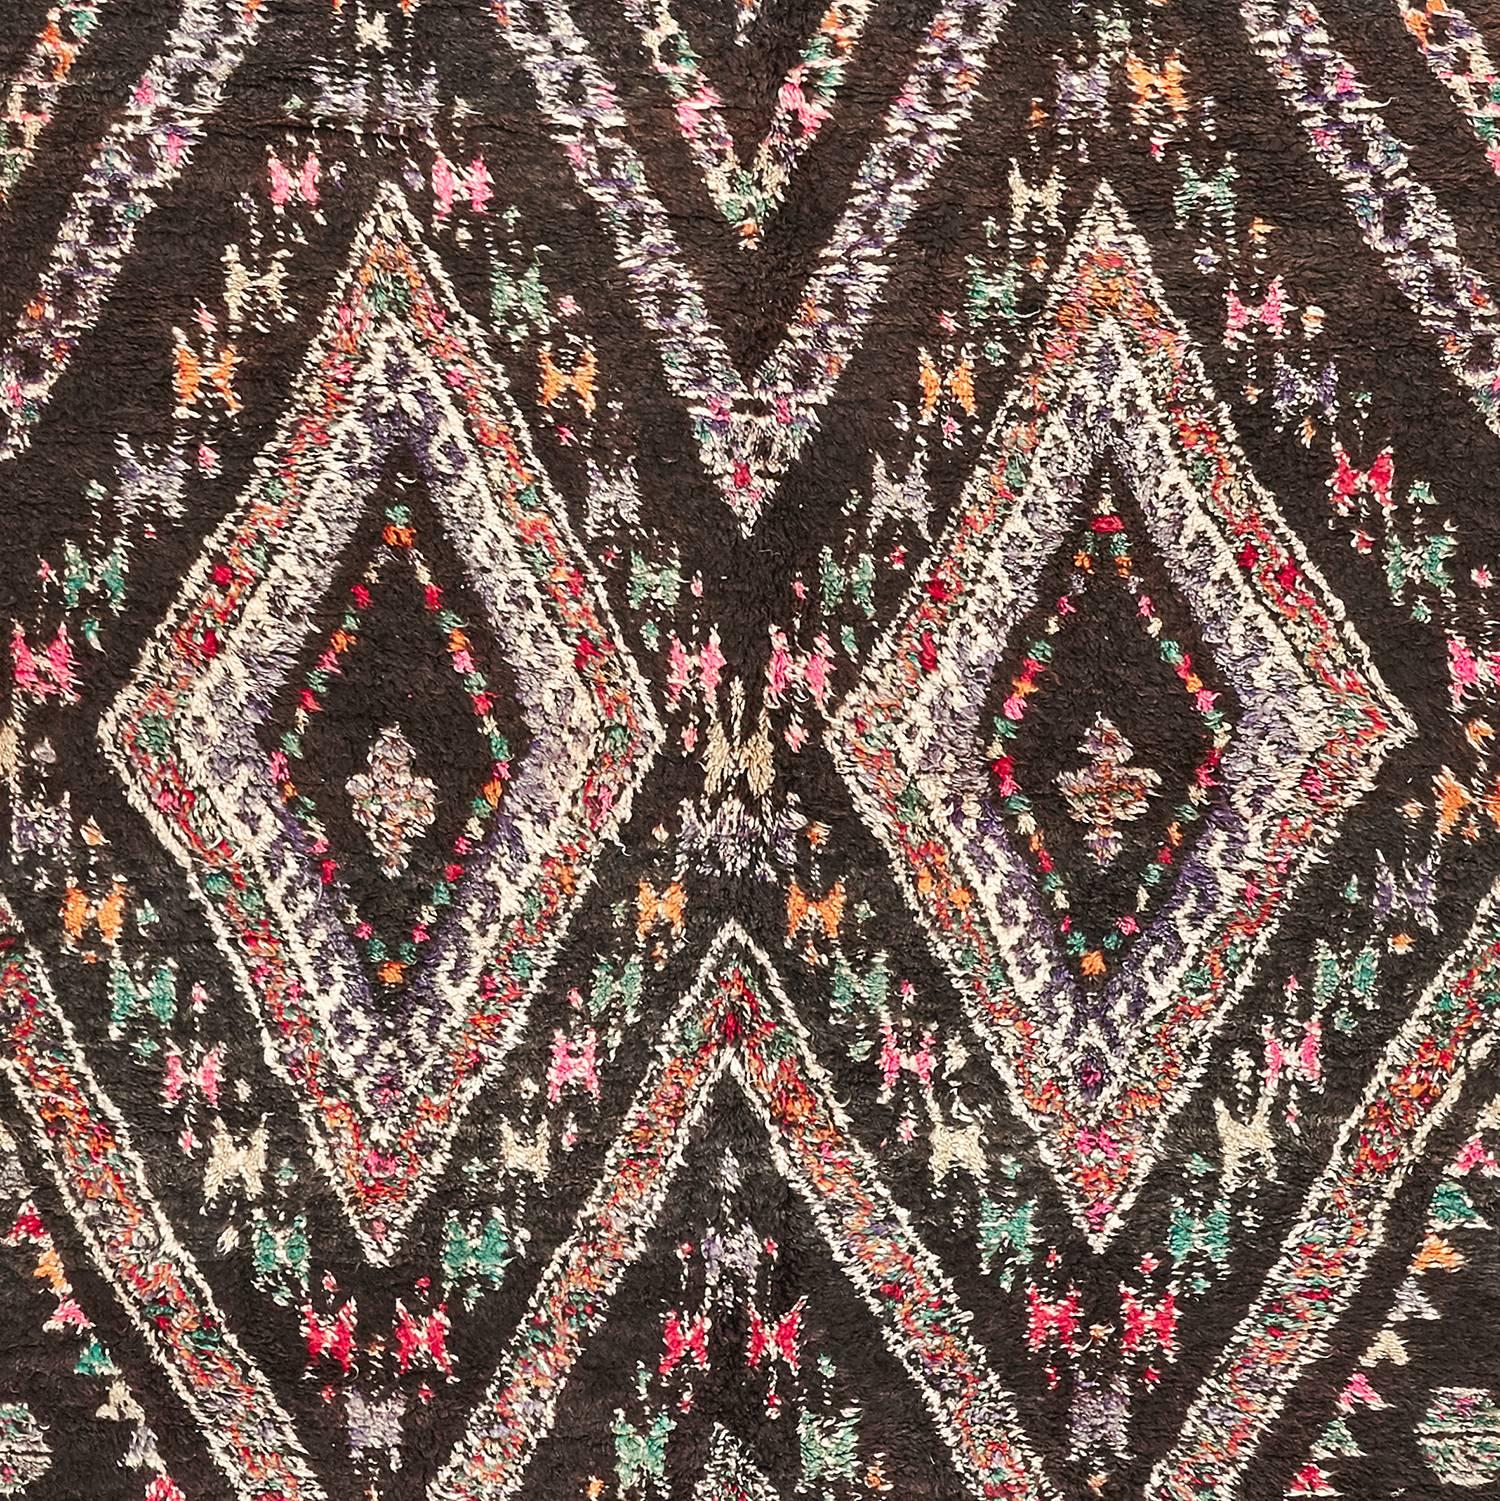 Individually selected by Madeline during her travels, these timeless carpets have been made in the Atlas mountains of Morocco by the Beni Ourain and Berber tribes. This rug is from Ait Seghrouchène. Hand-knotted with hand-spun wool. 100% wool.